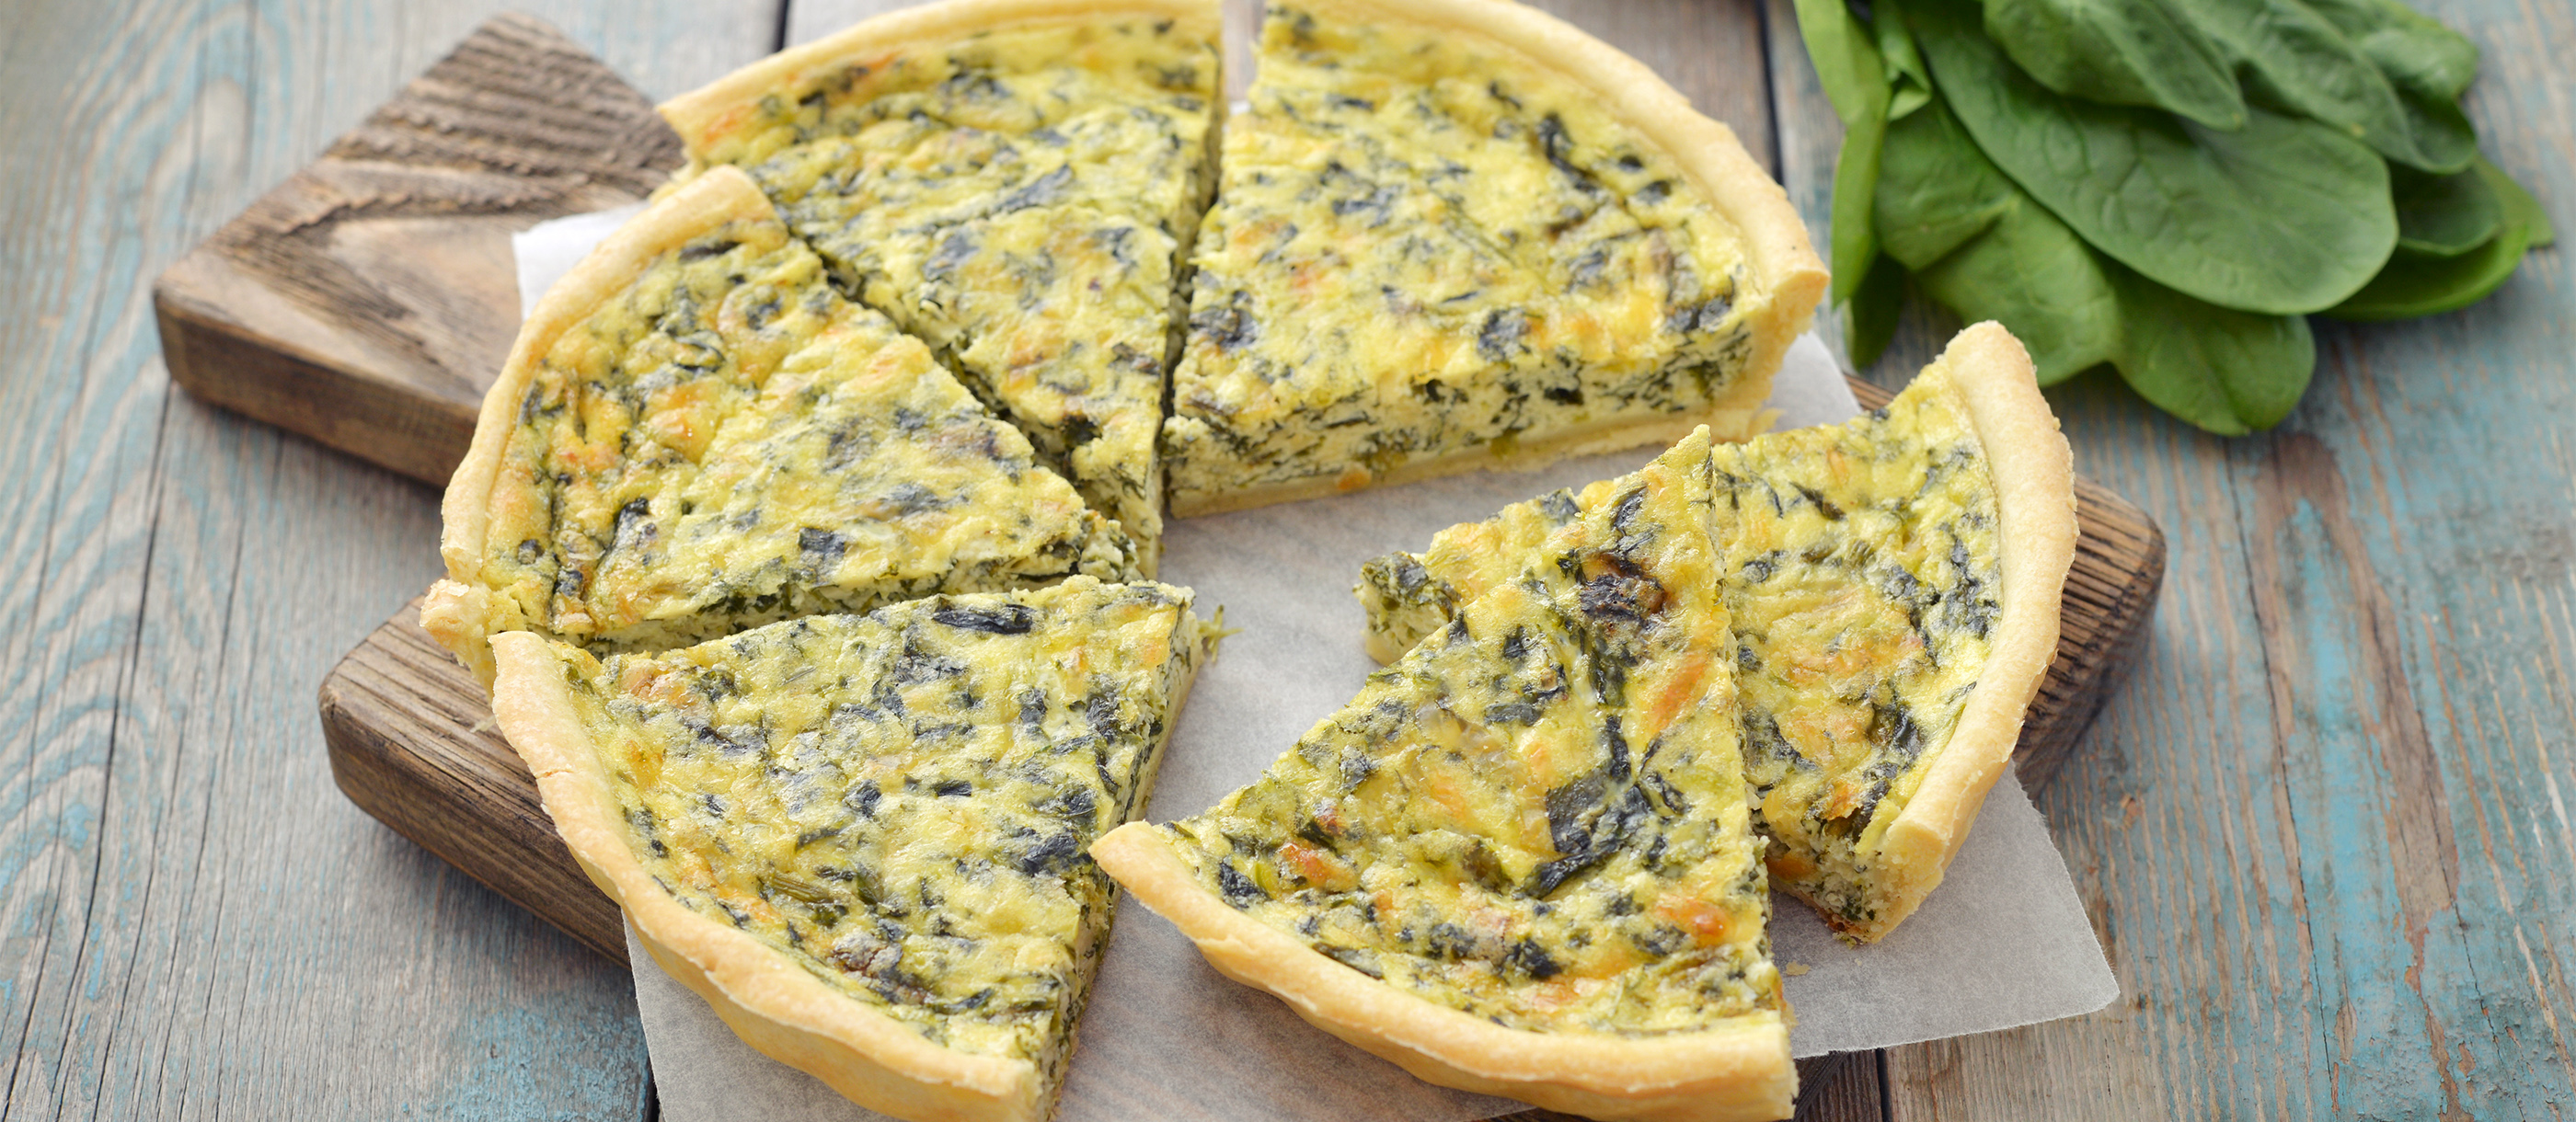 Quiche Florentine | Traditional Savory Pie From France